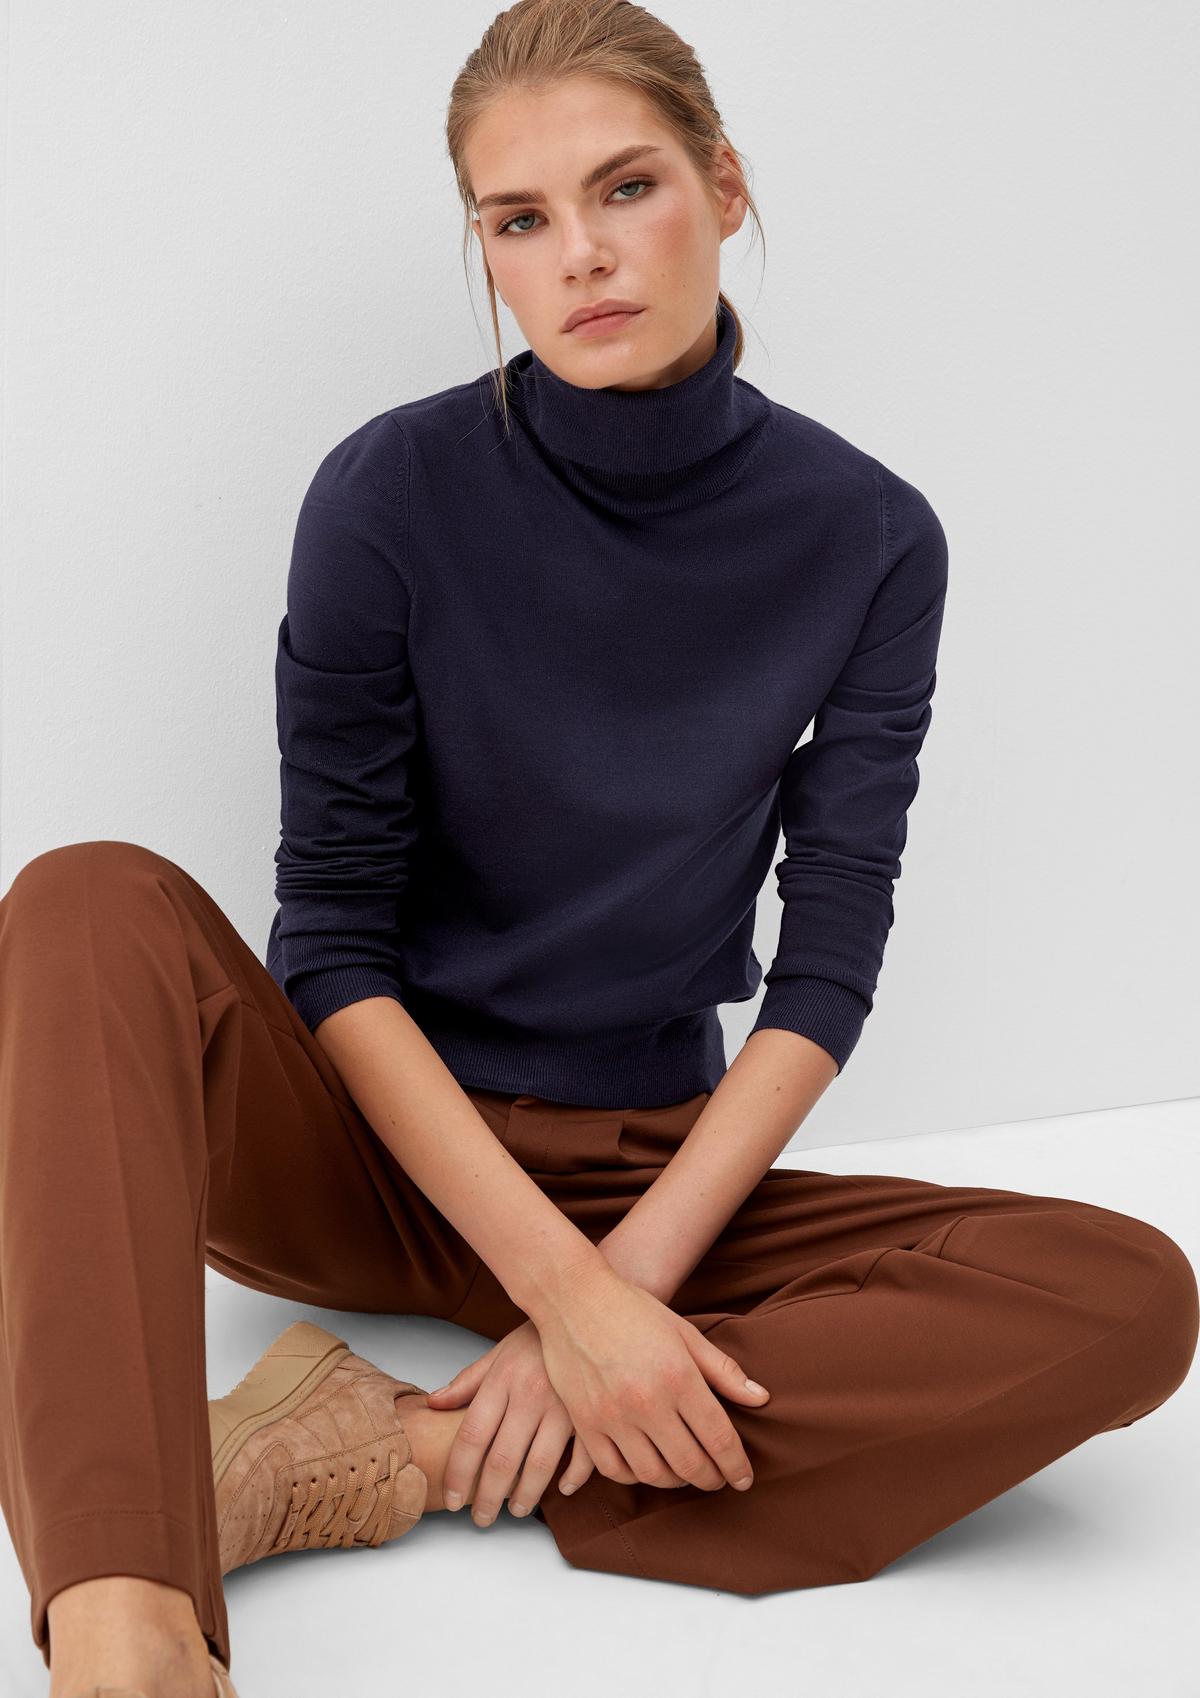 s.Oliver Fine knit jumper with a polo neck